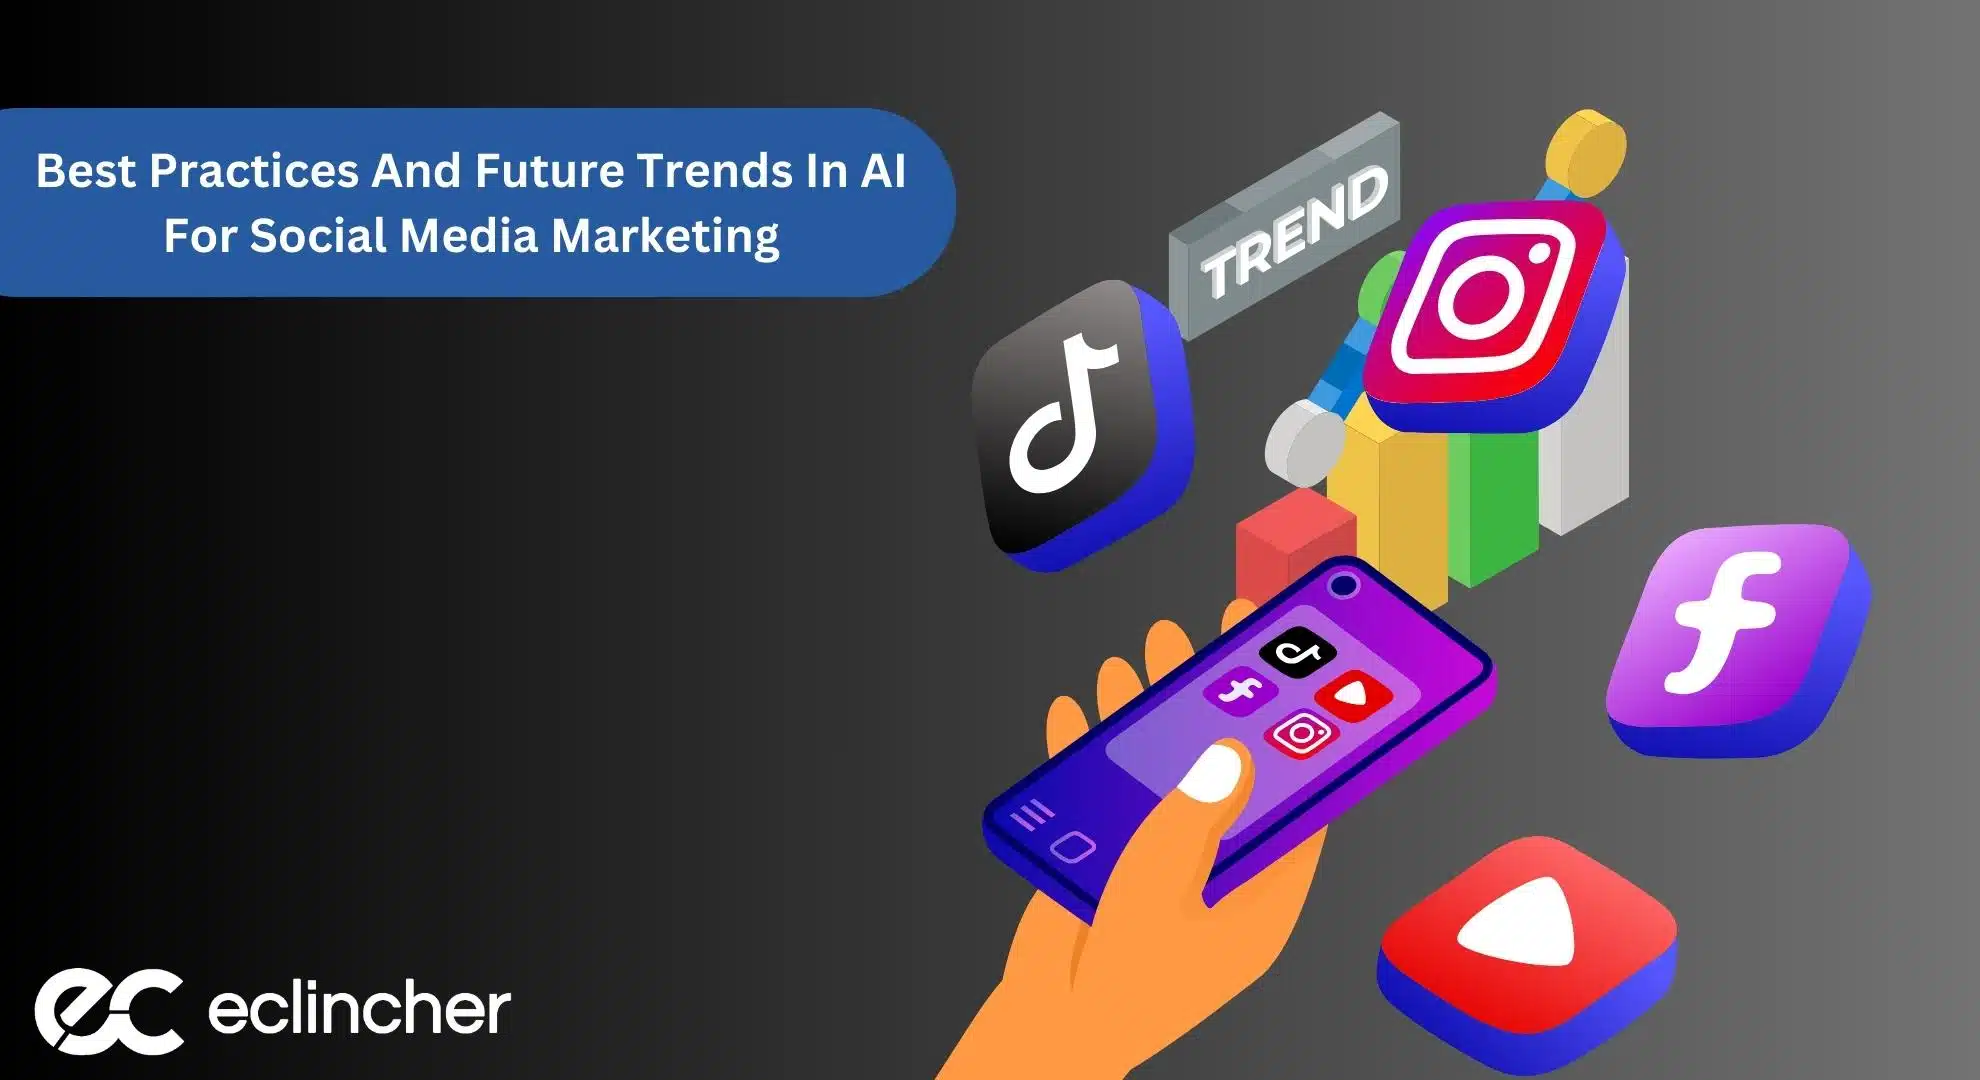 Best Practices And Future Trends In AI For Social Media Marketing